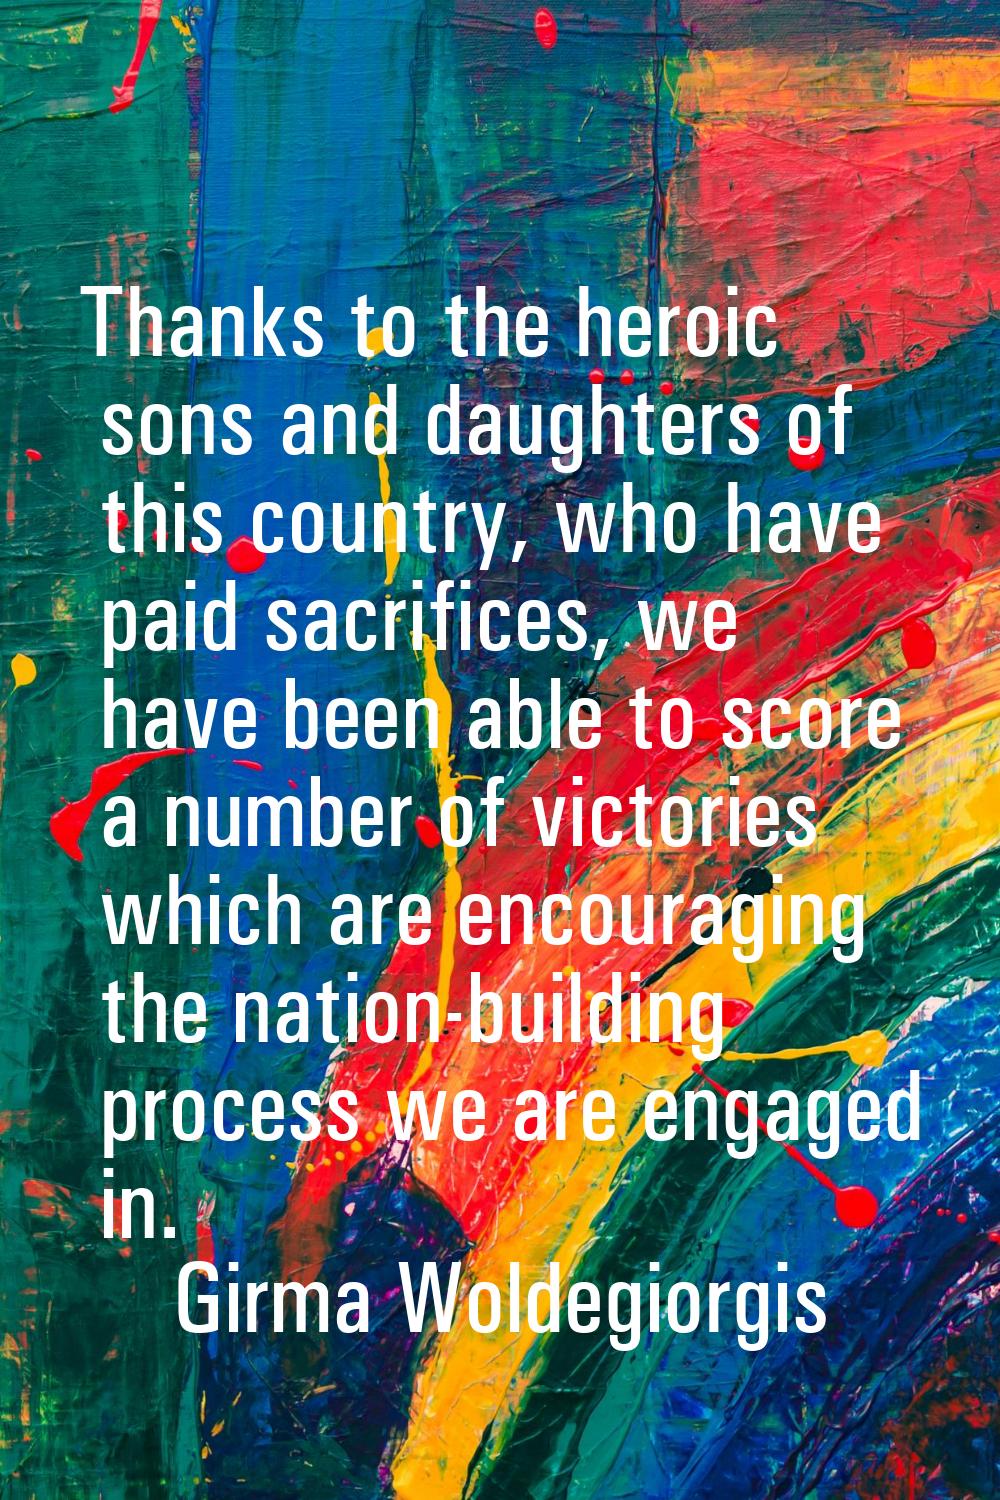 Thanks to the heroic sons and daughters of this country, who have paid sacrifices, we have been abl